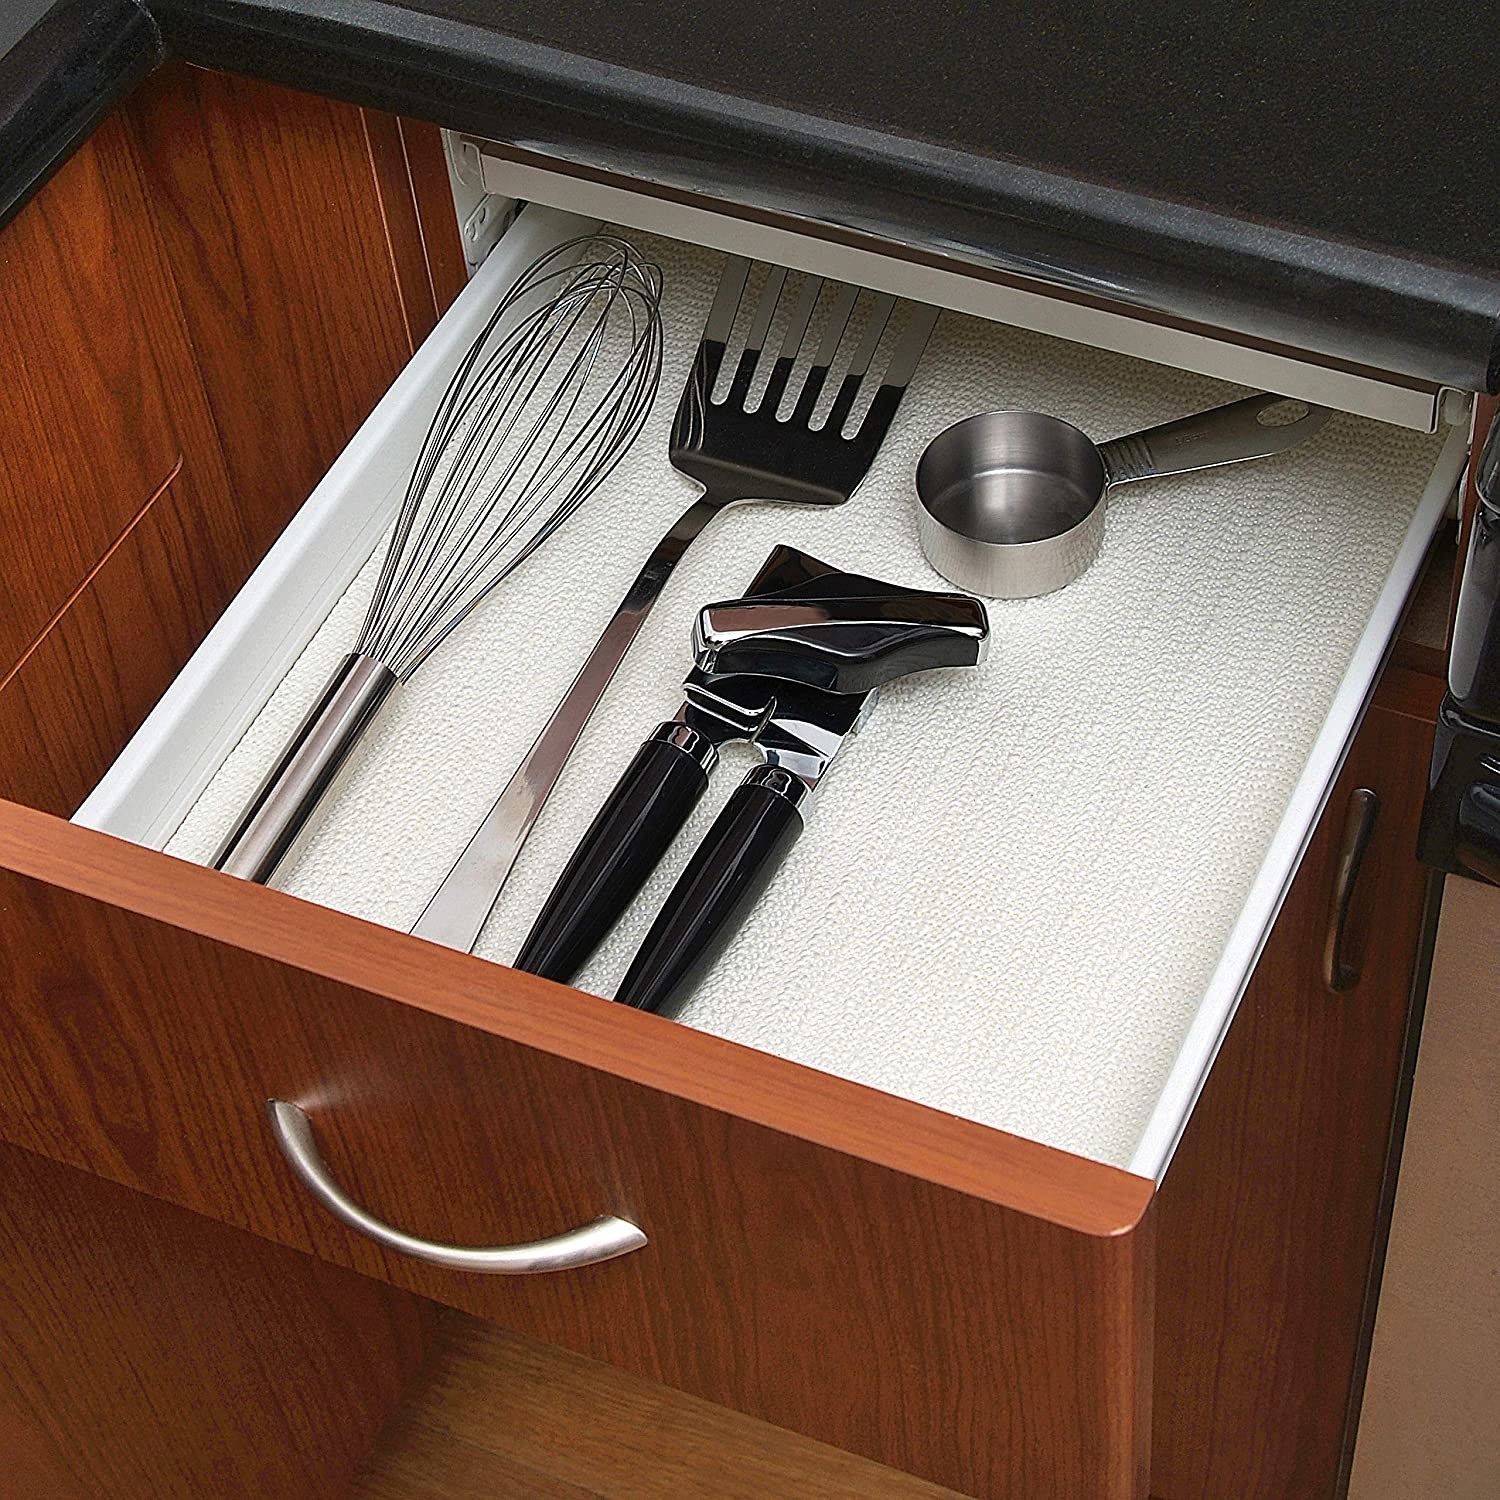 Several utensils on top of the drawer liner in a drawer